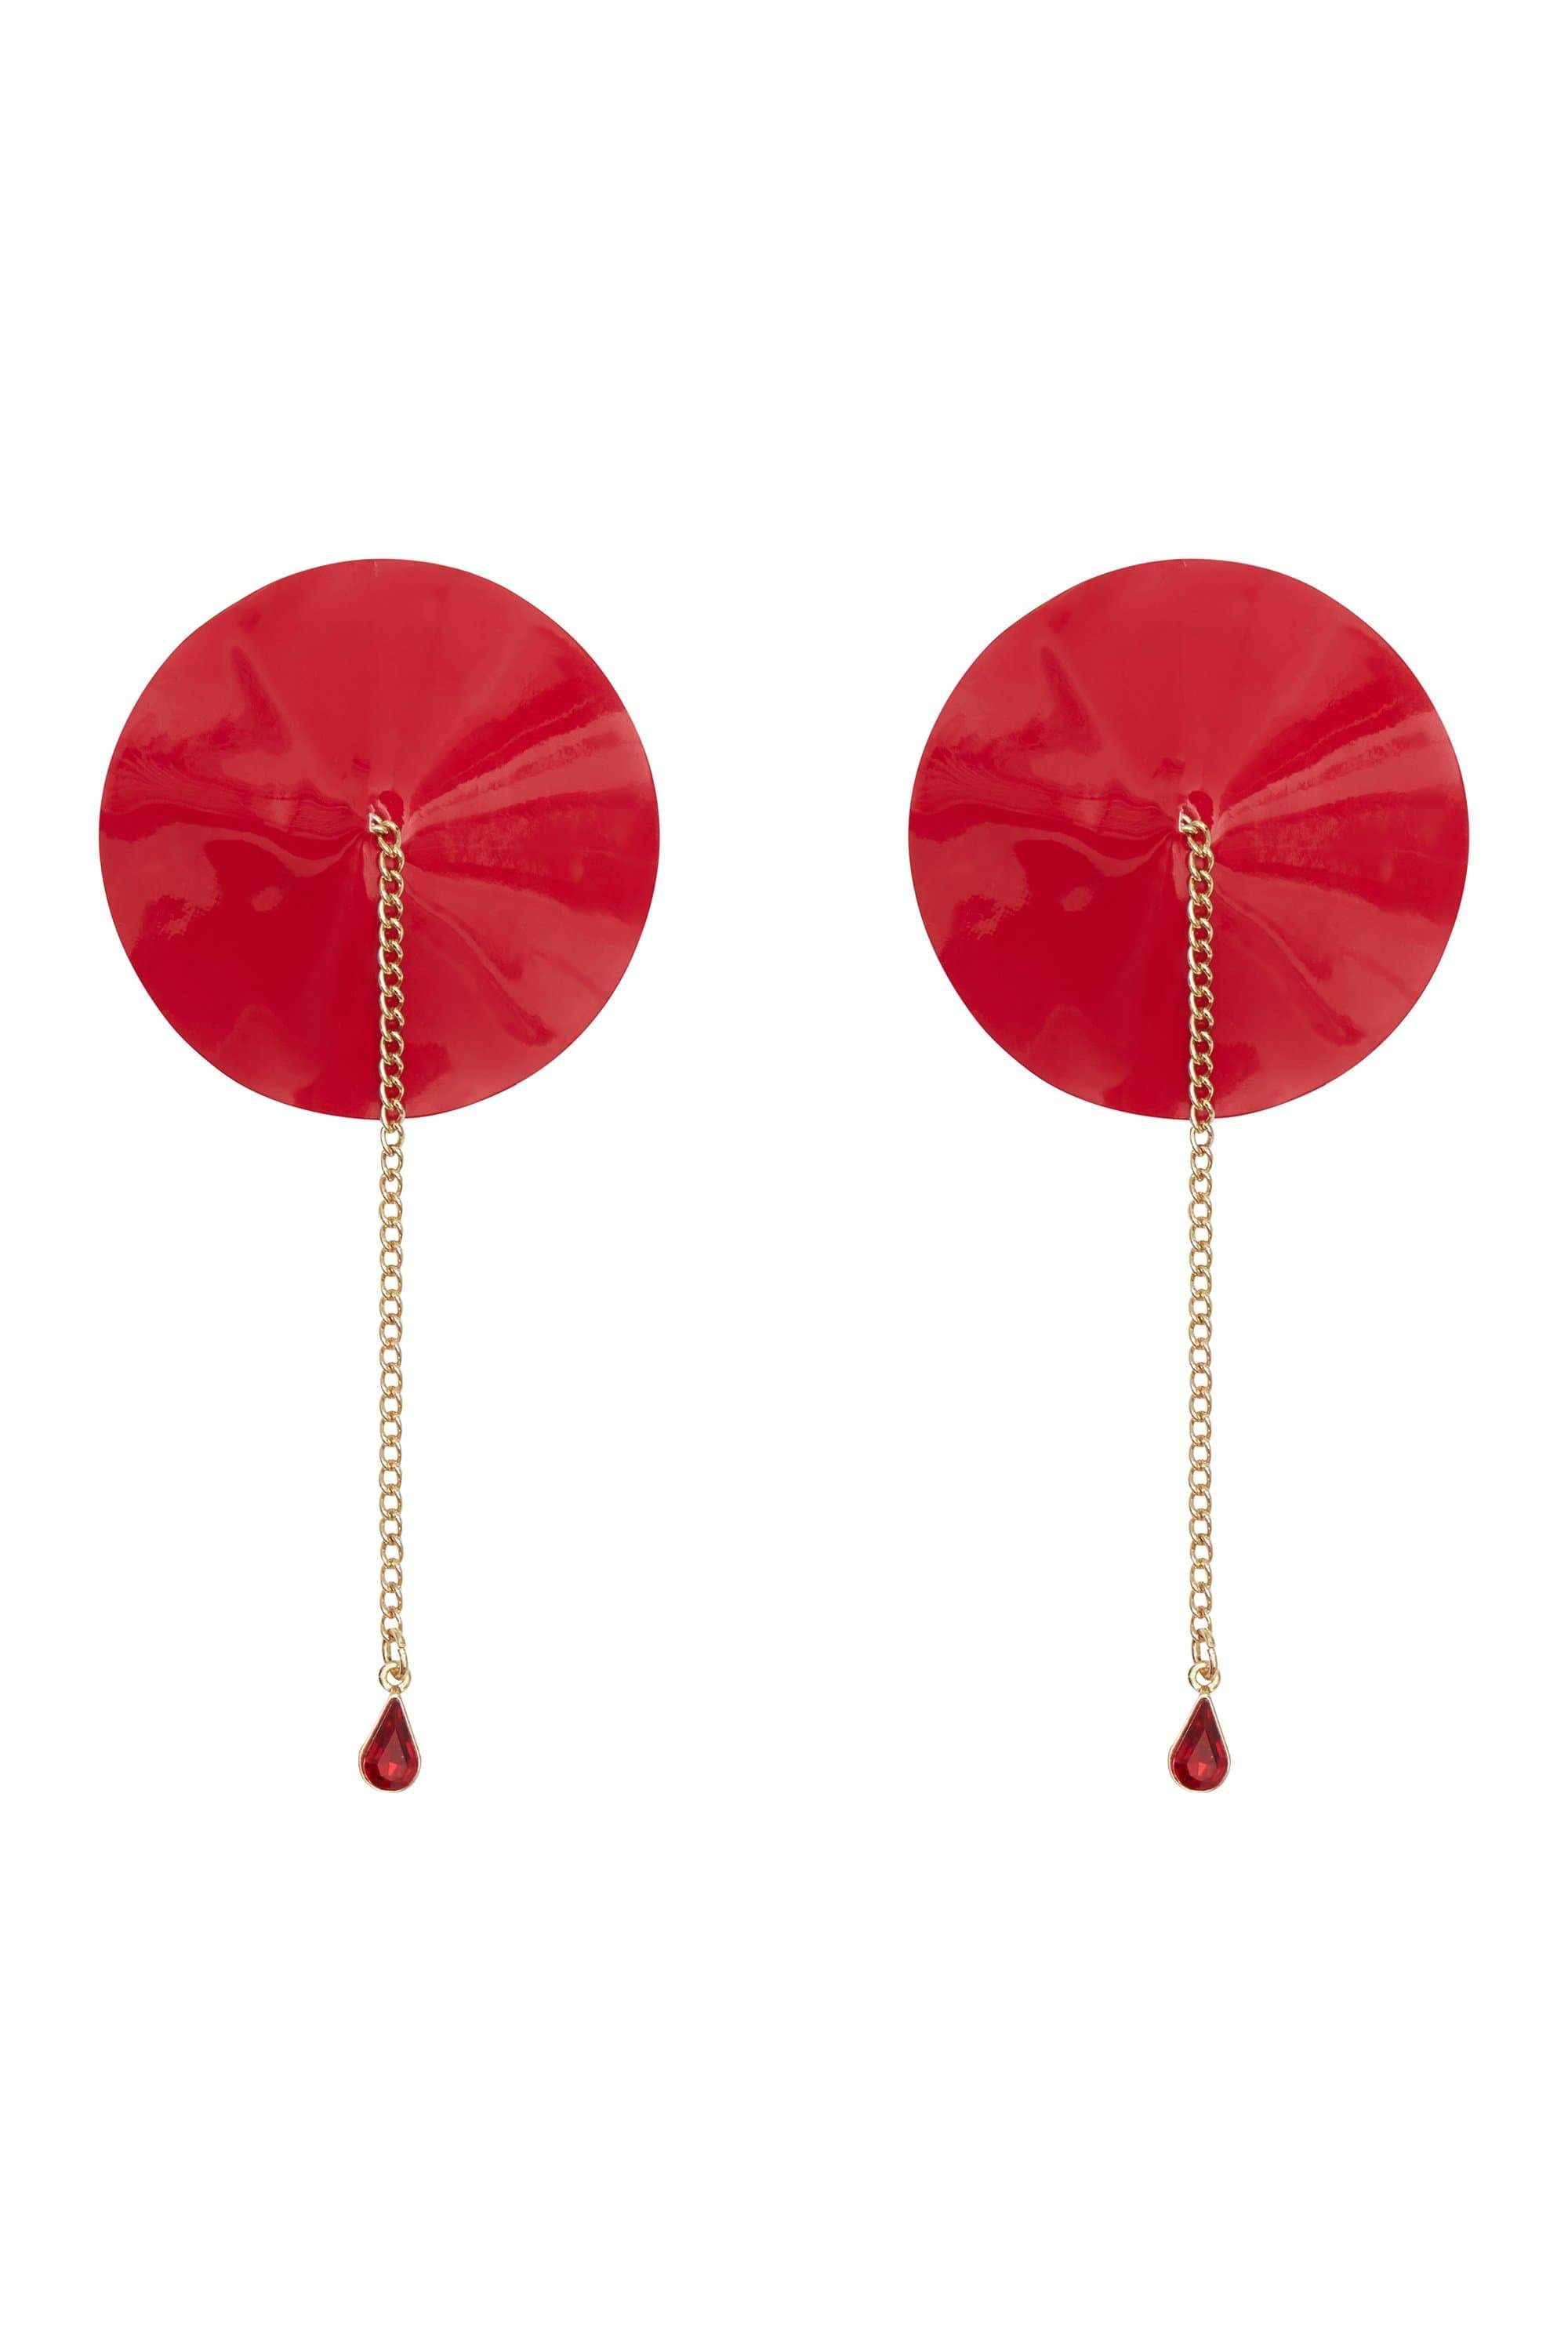 Chain Detail Nipple Pastie Red – Playful Promises